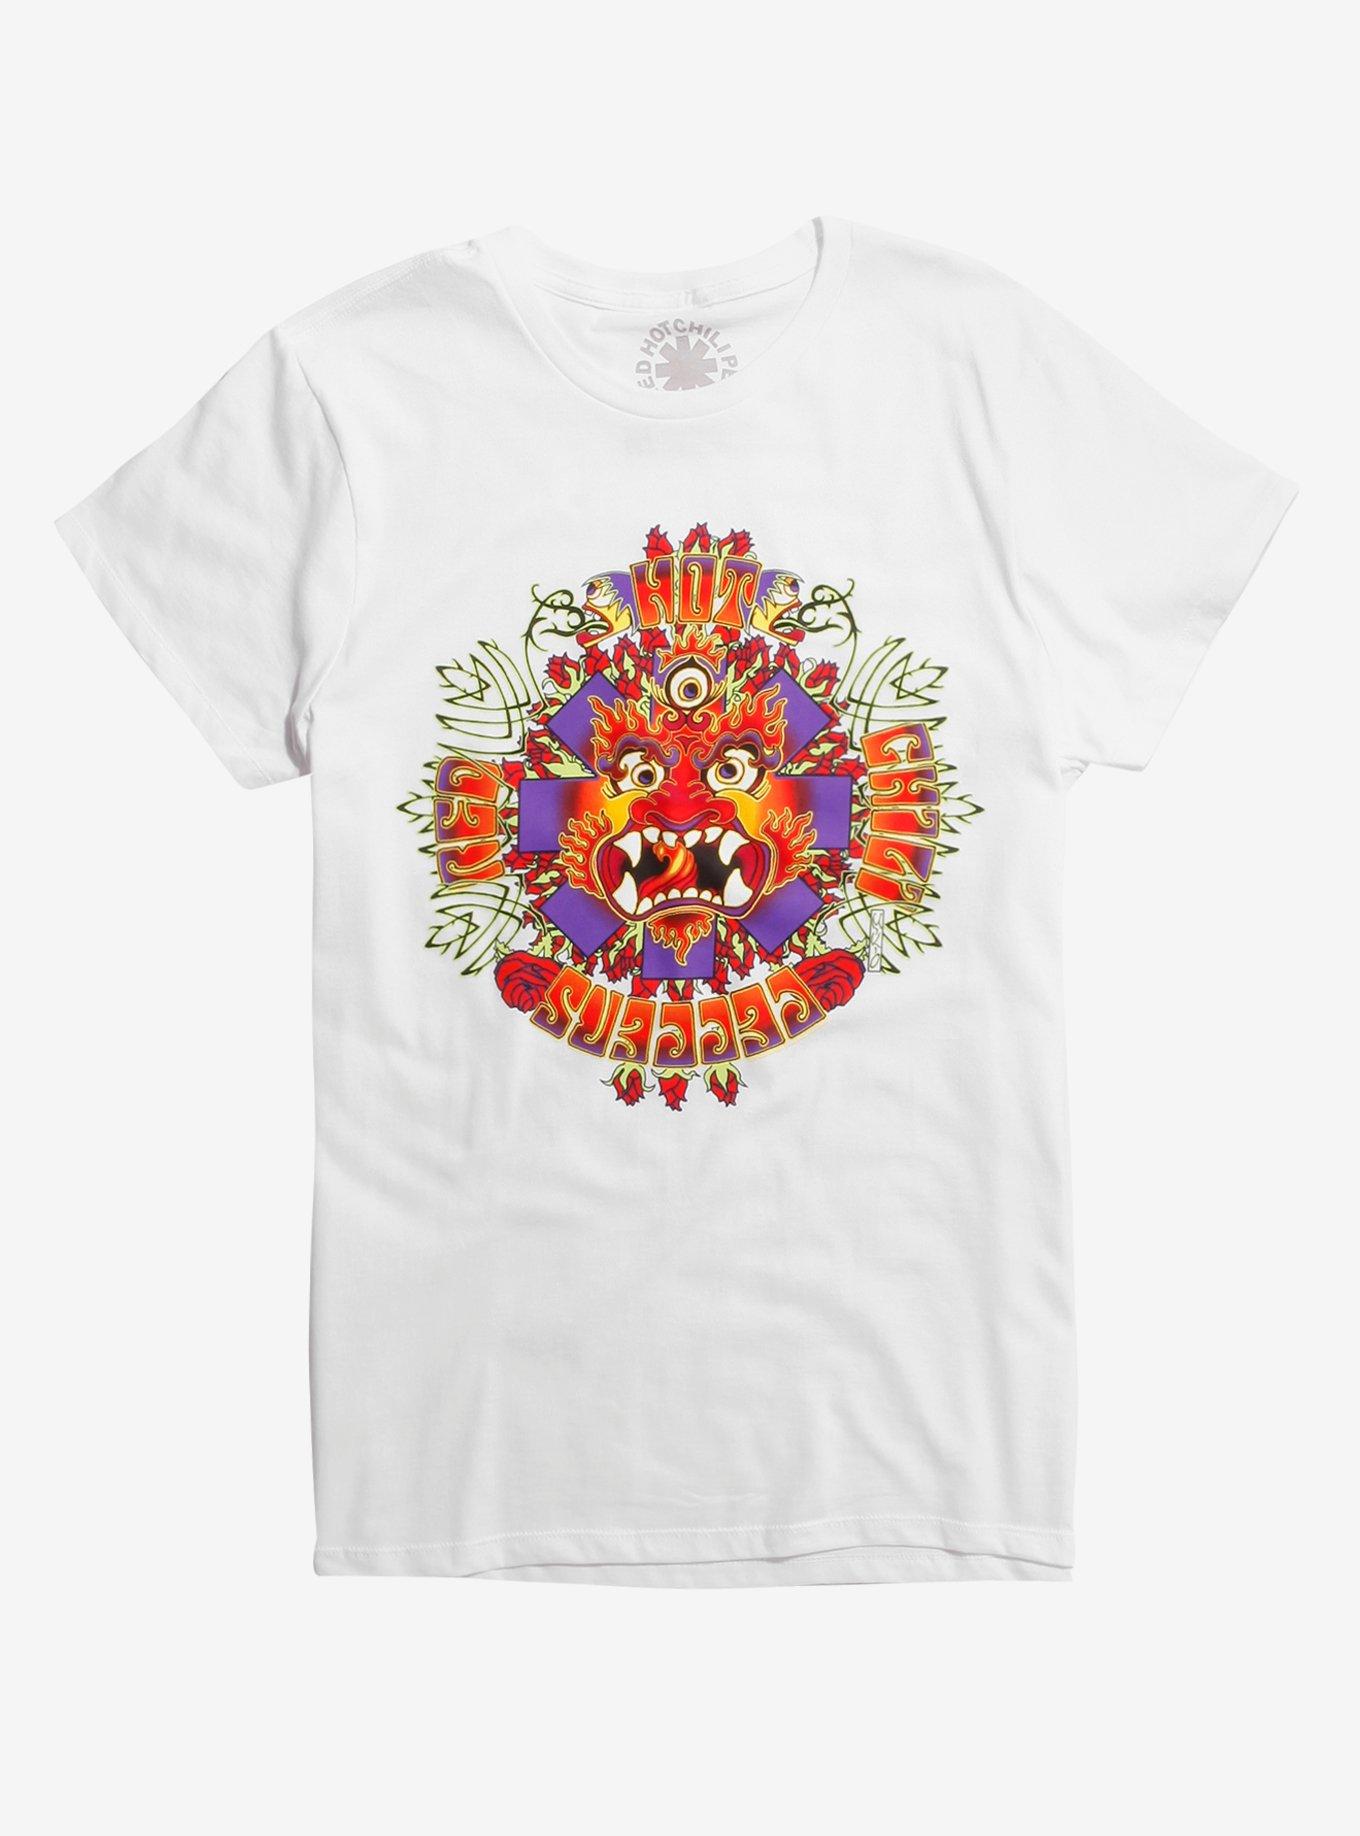 Red Hot Chili Peppers Dragon T-Shirt, WHITE, hi-res